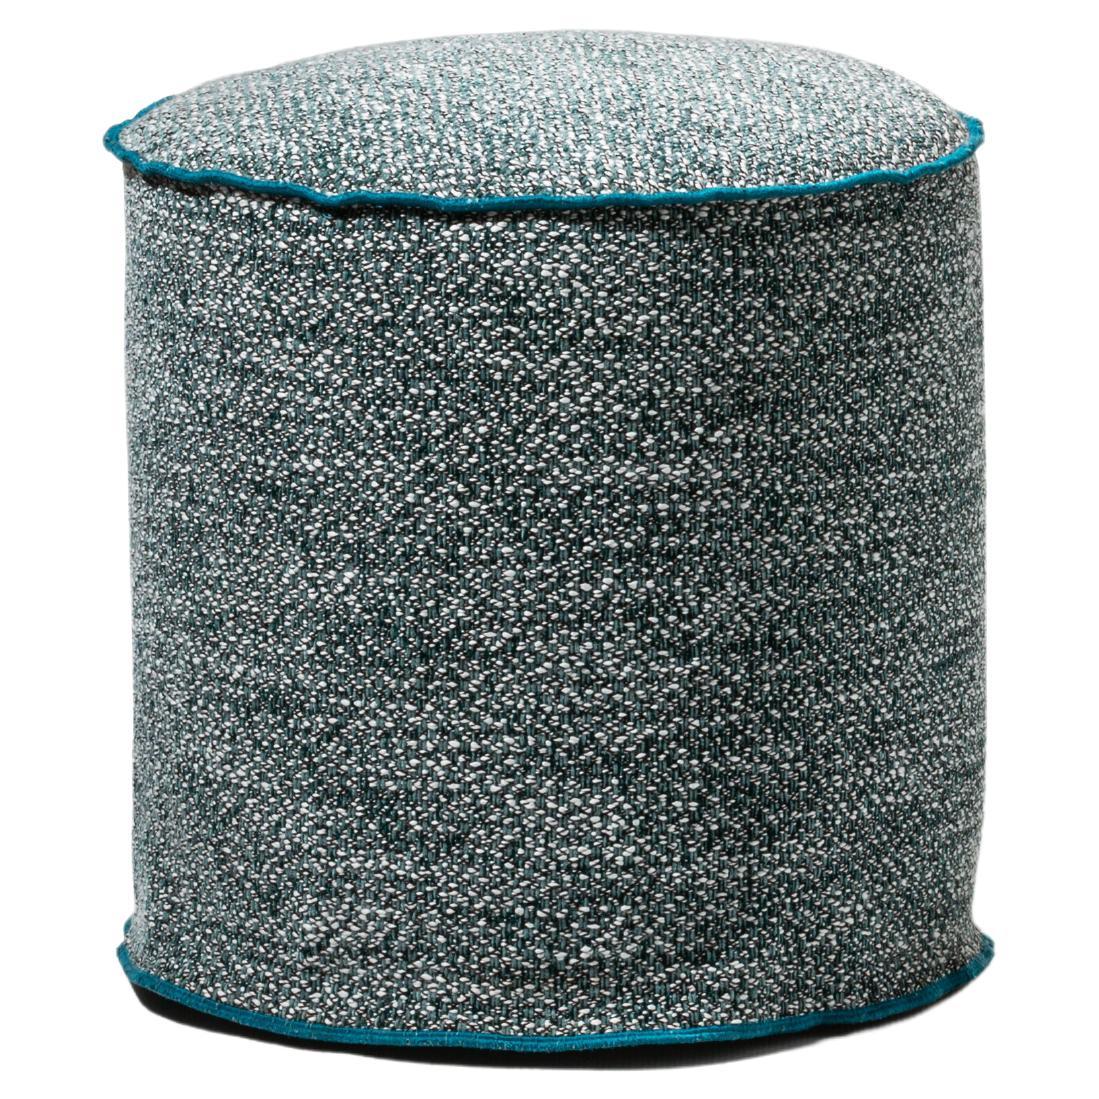 Gervasoni Small Brick Ottoman in Snake Upholstery by Paola Navone